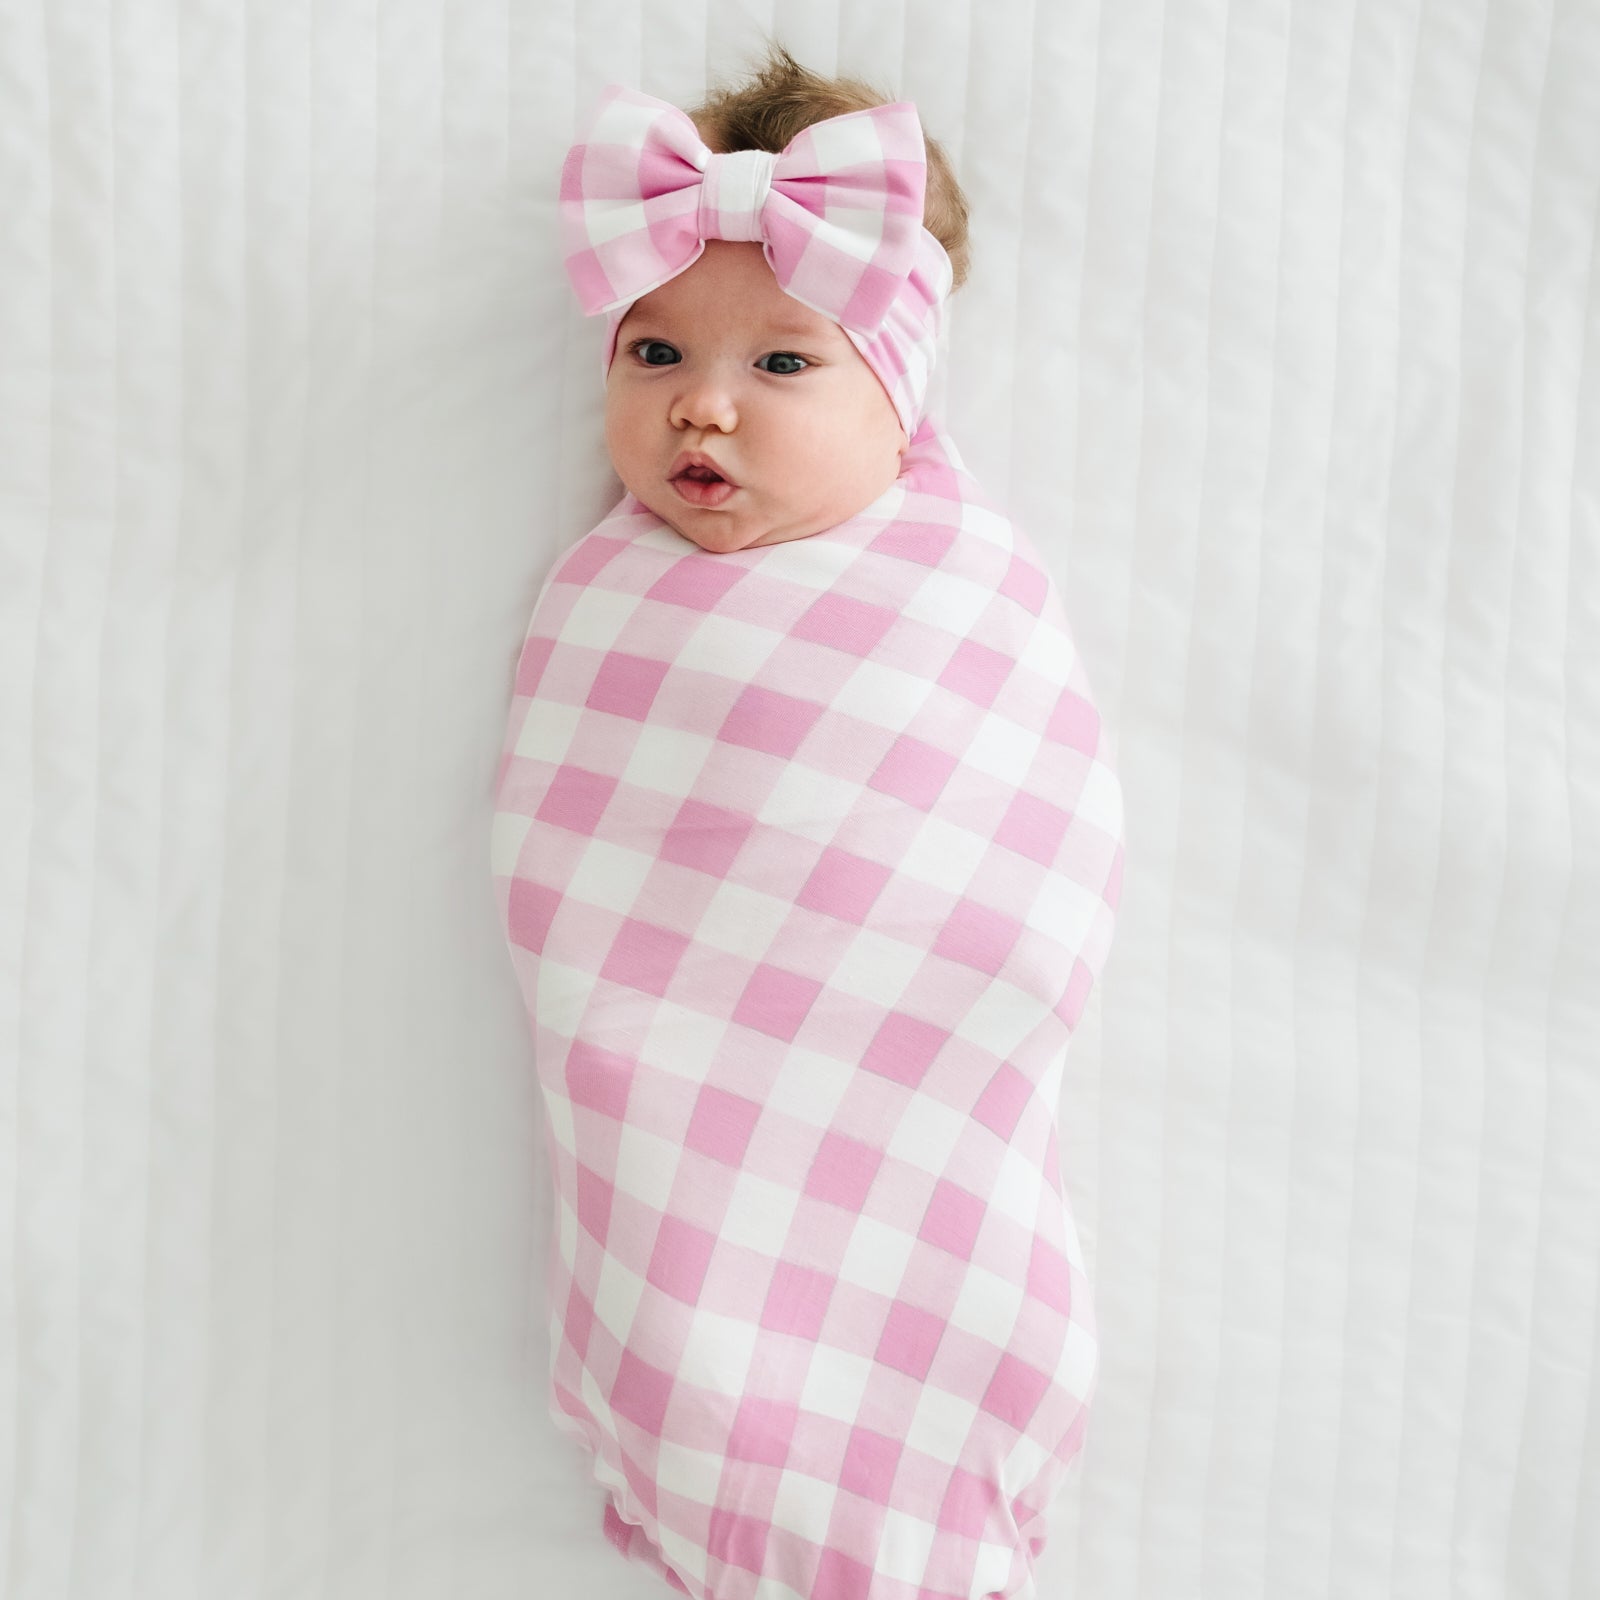 Child swaddled in a Pink Gingham swaddle and luxe bow headband set